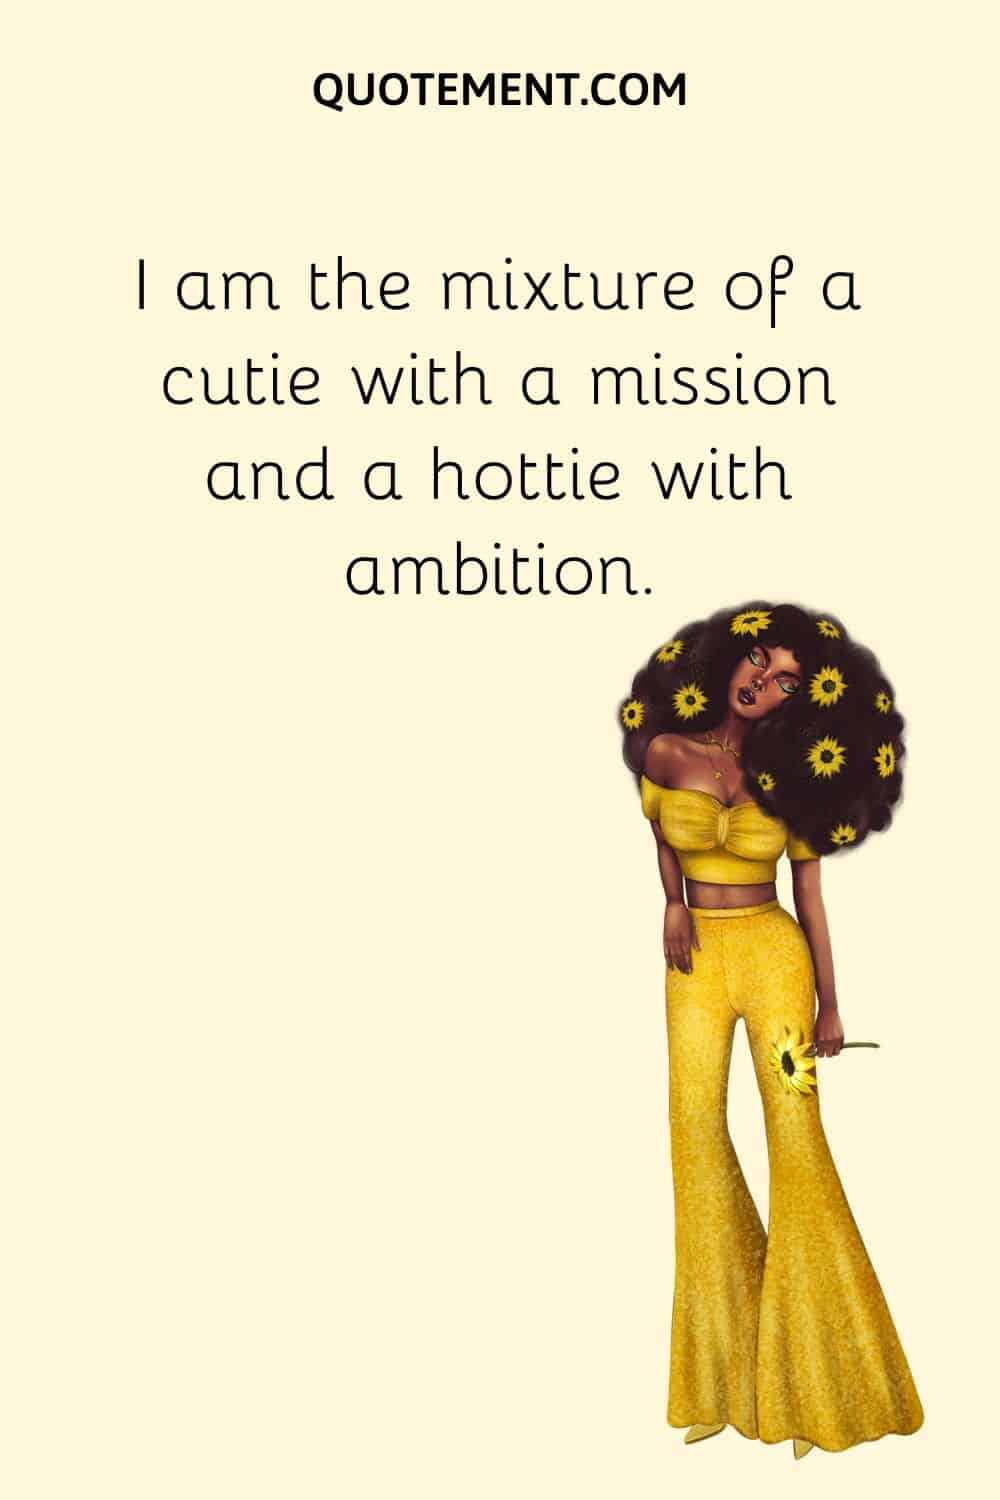 I am the mixture of a cutie with a mission and a hottie with ambition